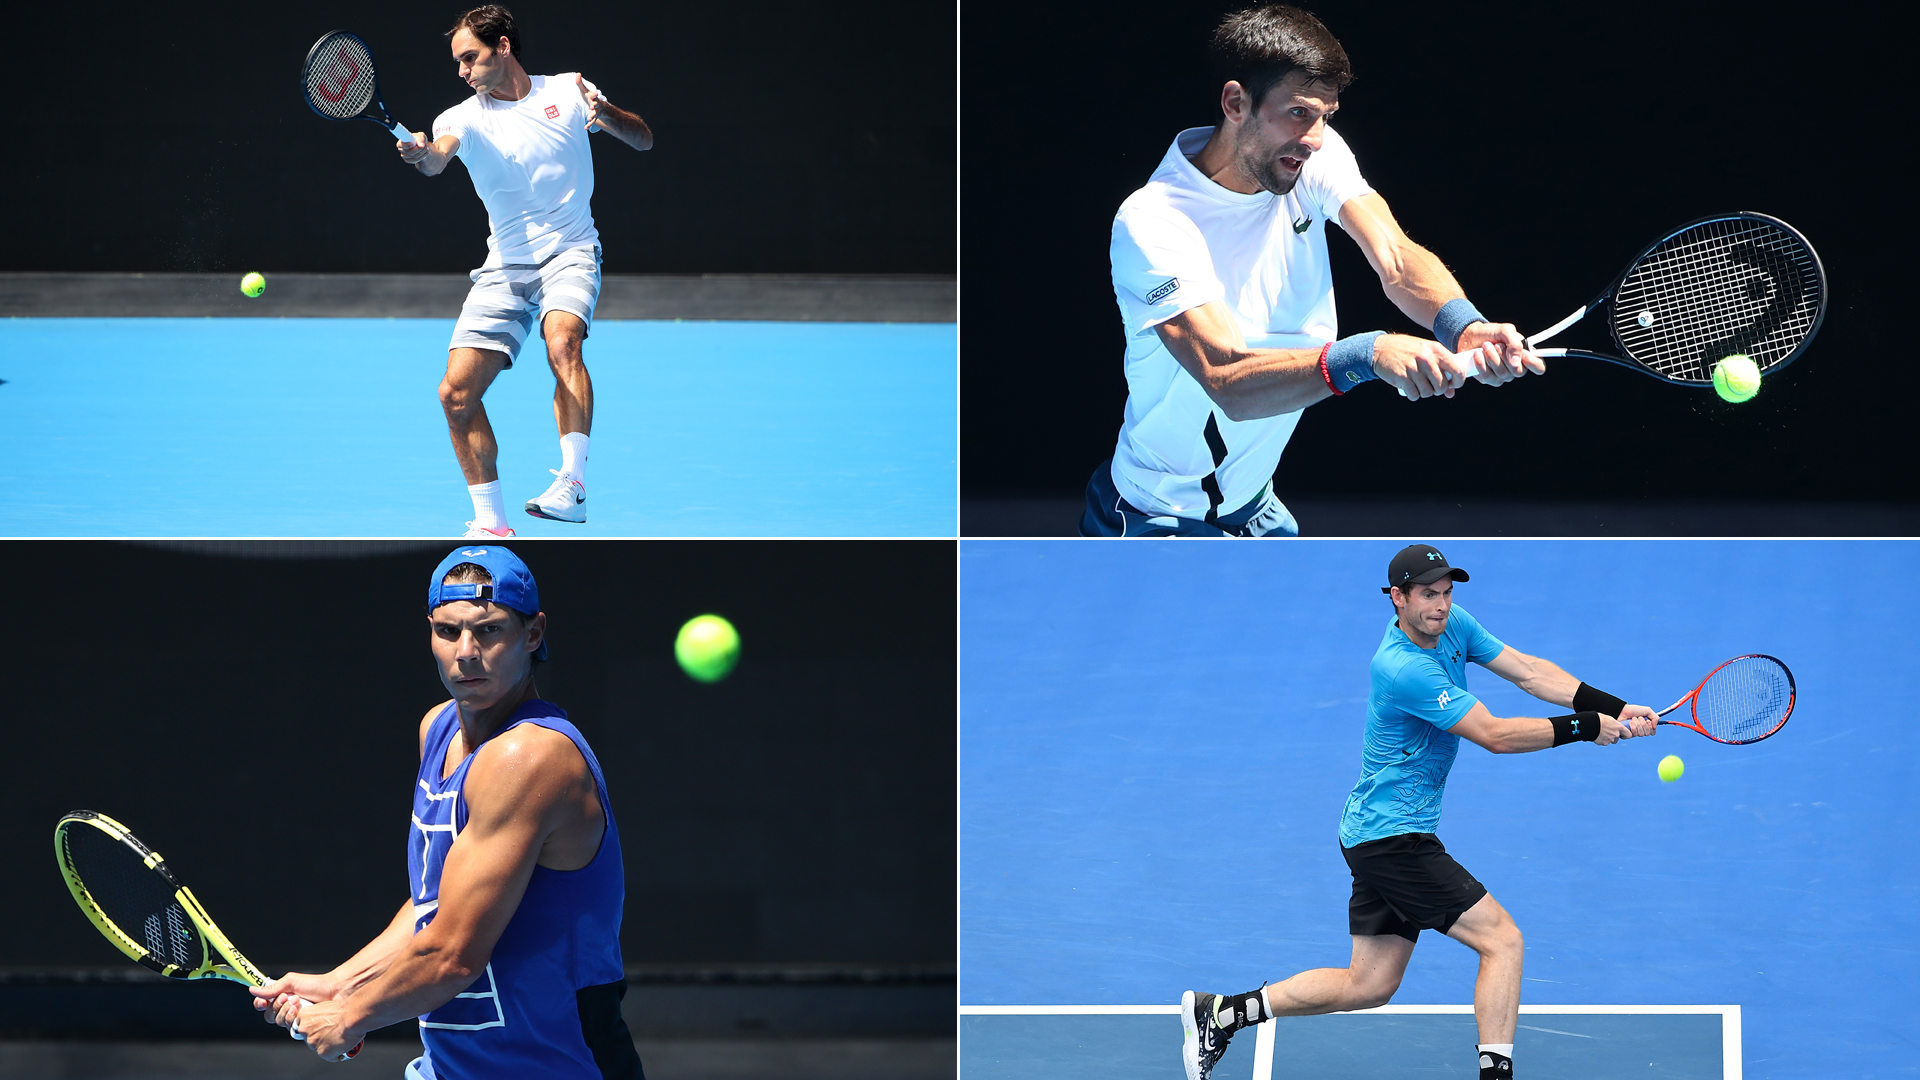 It appears as though Roger Federer and Novak Djokovic carry the hopes of the 'Big Four' at the Australian Open.